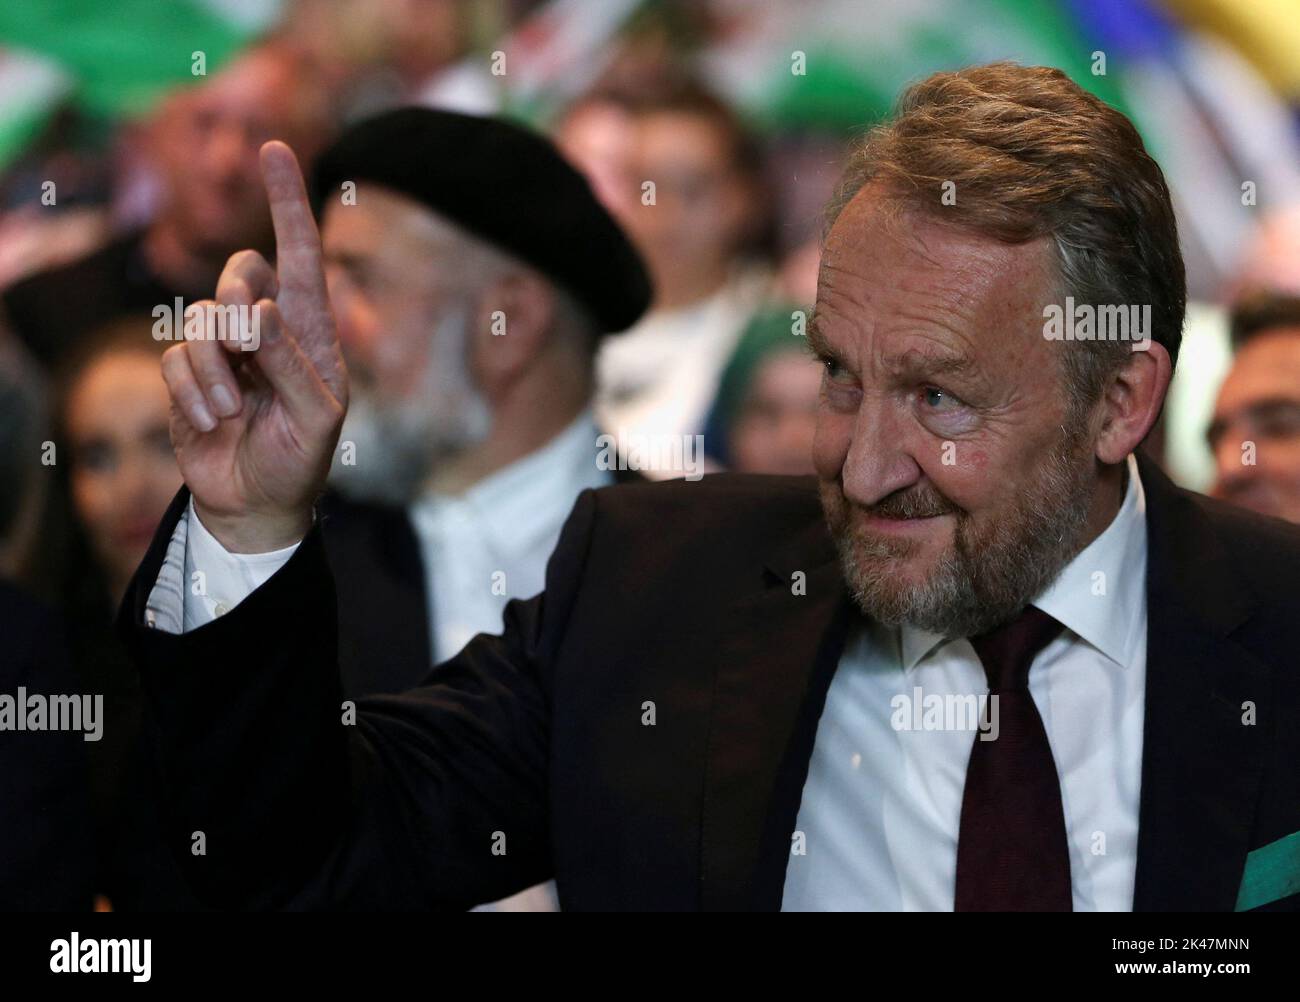 Bakir Izetbegovic of the Party of Democratic Action and Bosniak candidate of the Tri-partite Bosnian Presidency attends a final rally in Sarajevo, Bosnia and Herzegovina, September 30, 2022.REUTERS/Dado Ruvic Stock Photo